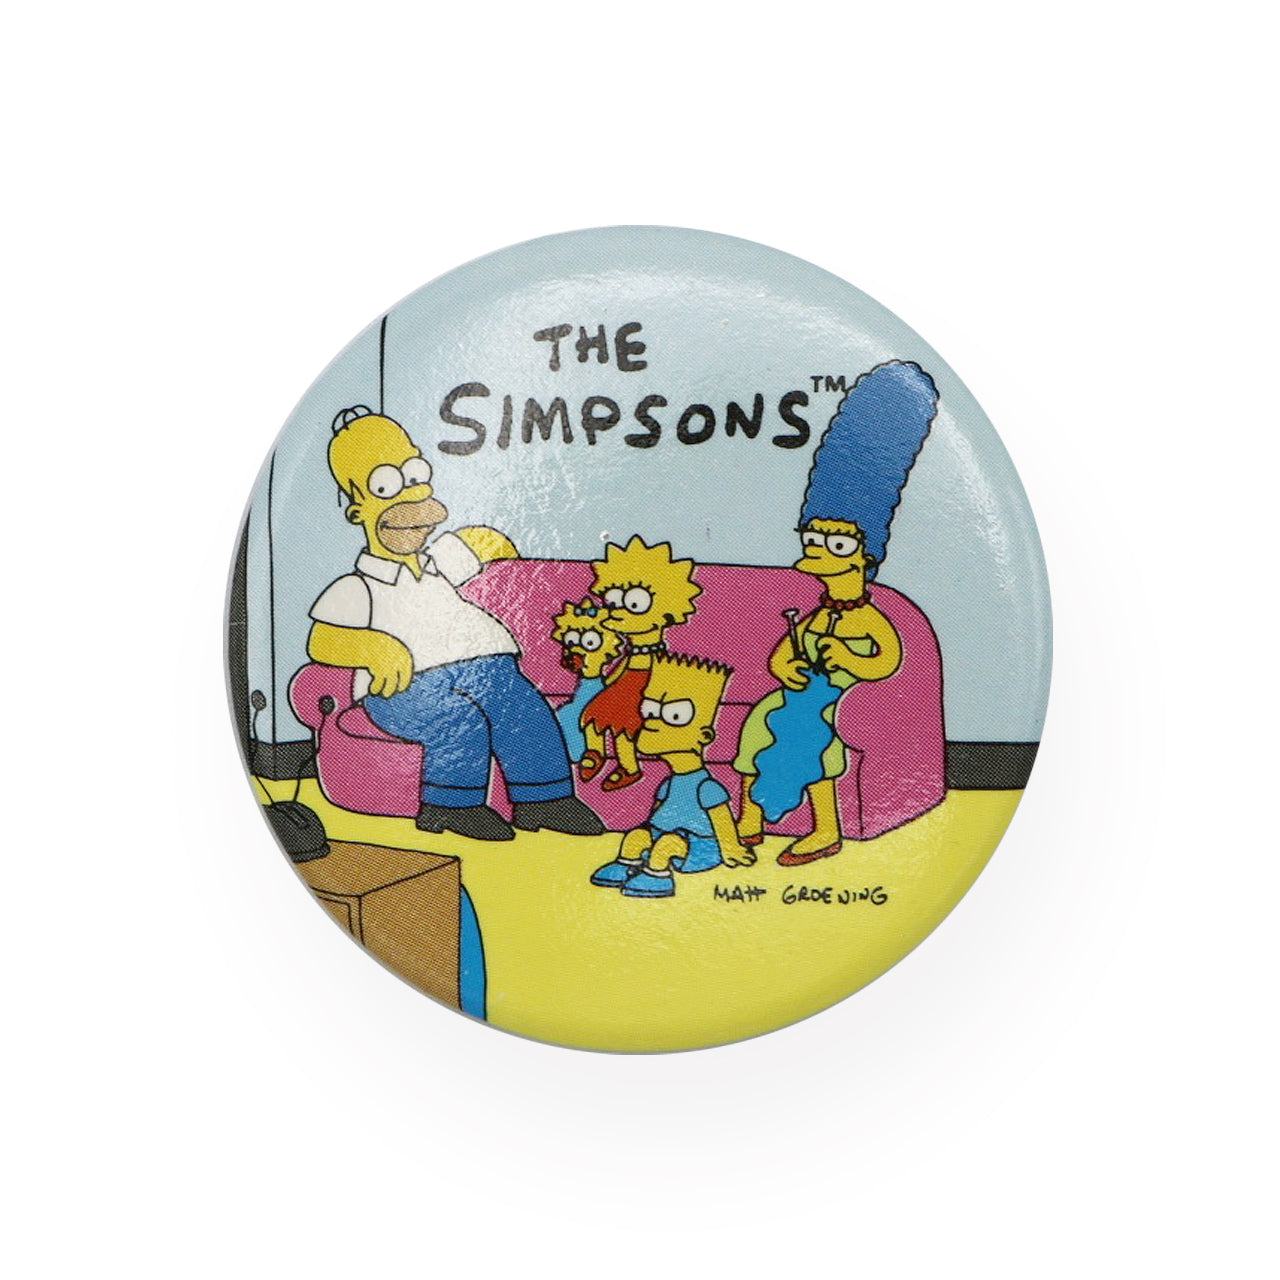 Vintage 1989 The Simpsons Pinback Button.  Add a little flair to your jacket, backpack or tote with this Vintage The Simpsons Pinback Button!  Measures 2 inches.  Please note that due to everyone’s monitor displaying differently, the colors you see may vary.